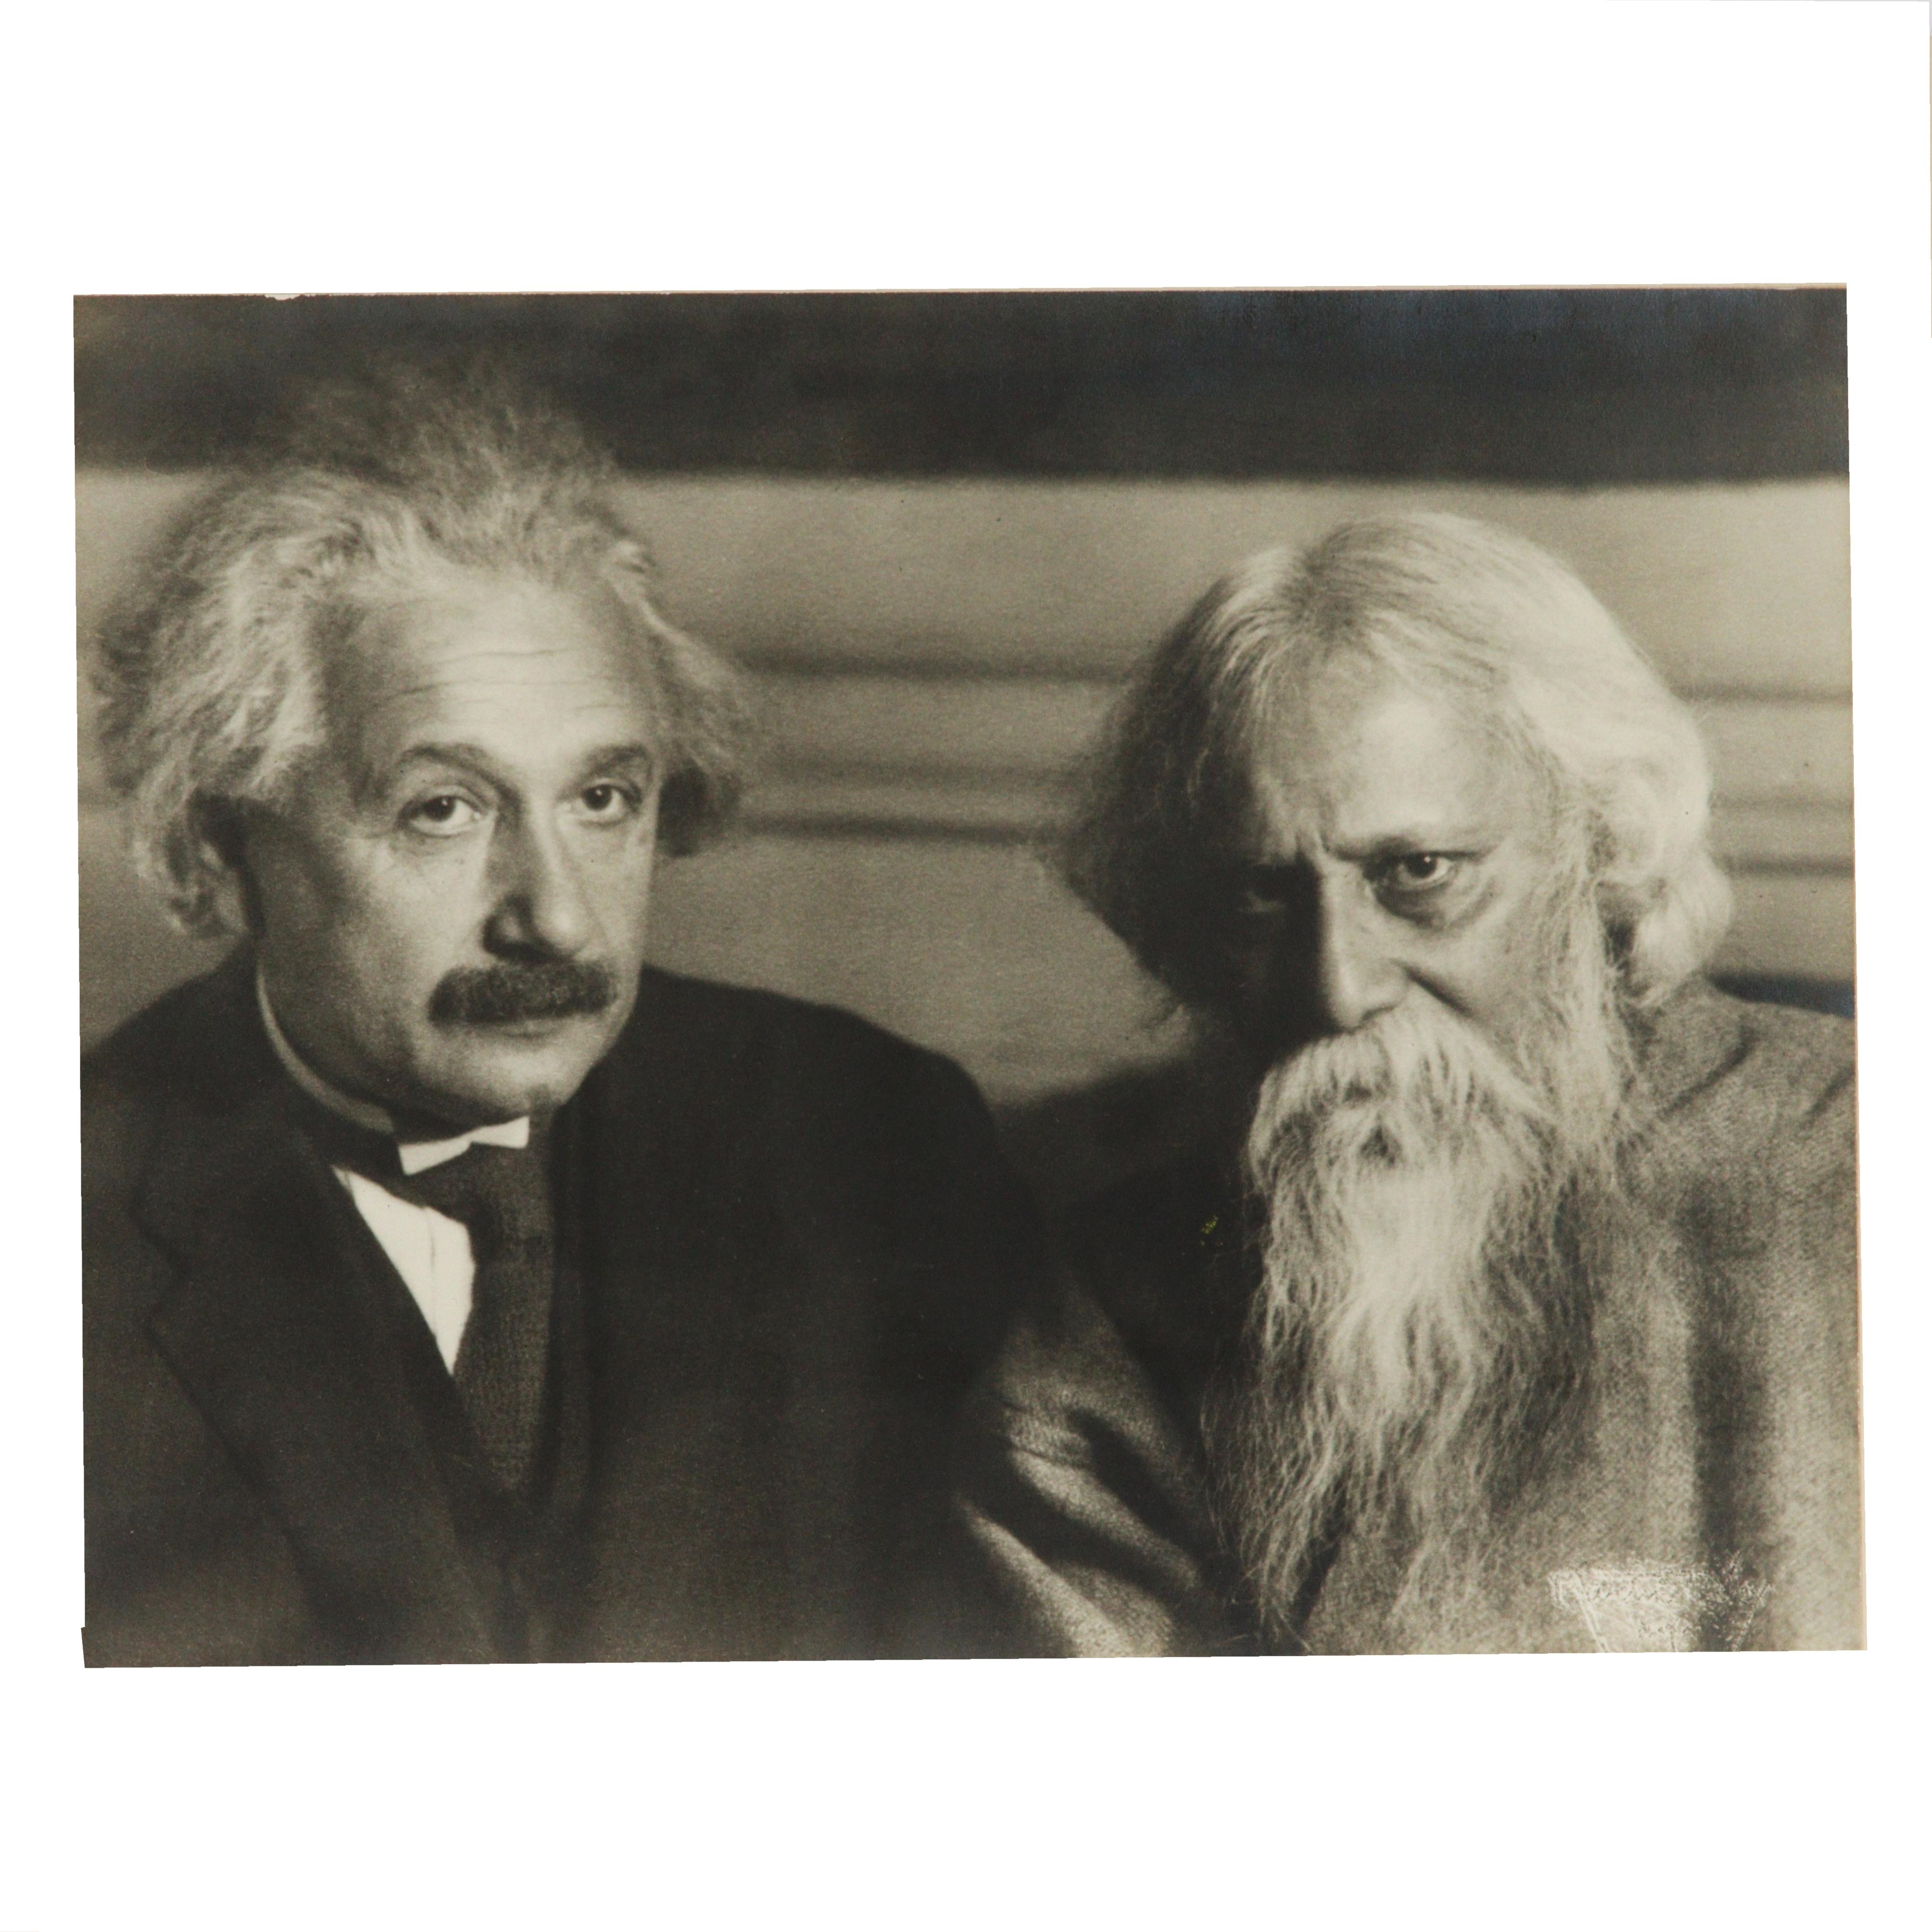 Artwork by Martin Vos, Albert Einstein and Rabindranath Tagore, Made of print